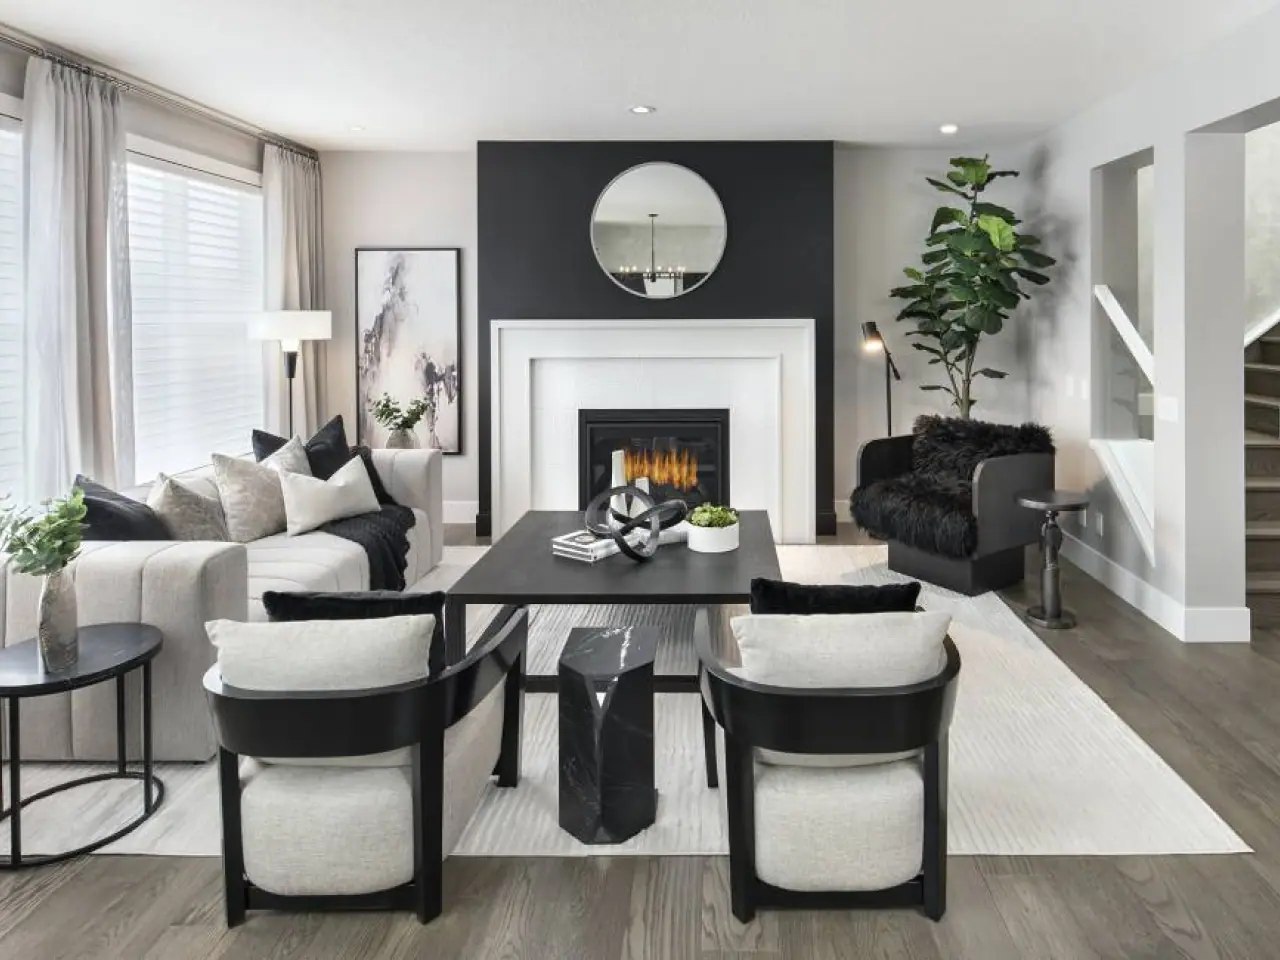 A contemporary and stylish modern living room with chic furniture, ambient lighting, and a cozy atmosphere, creating an inviting and comfortable space for relaxation and socializing.